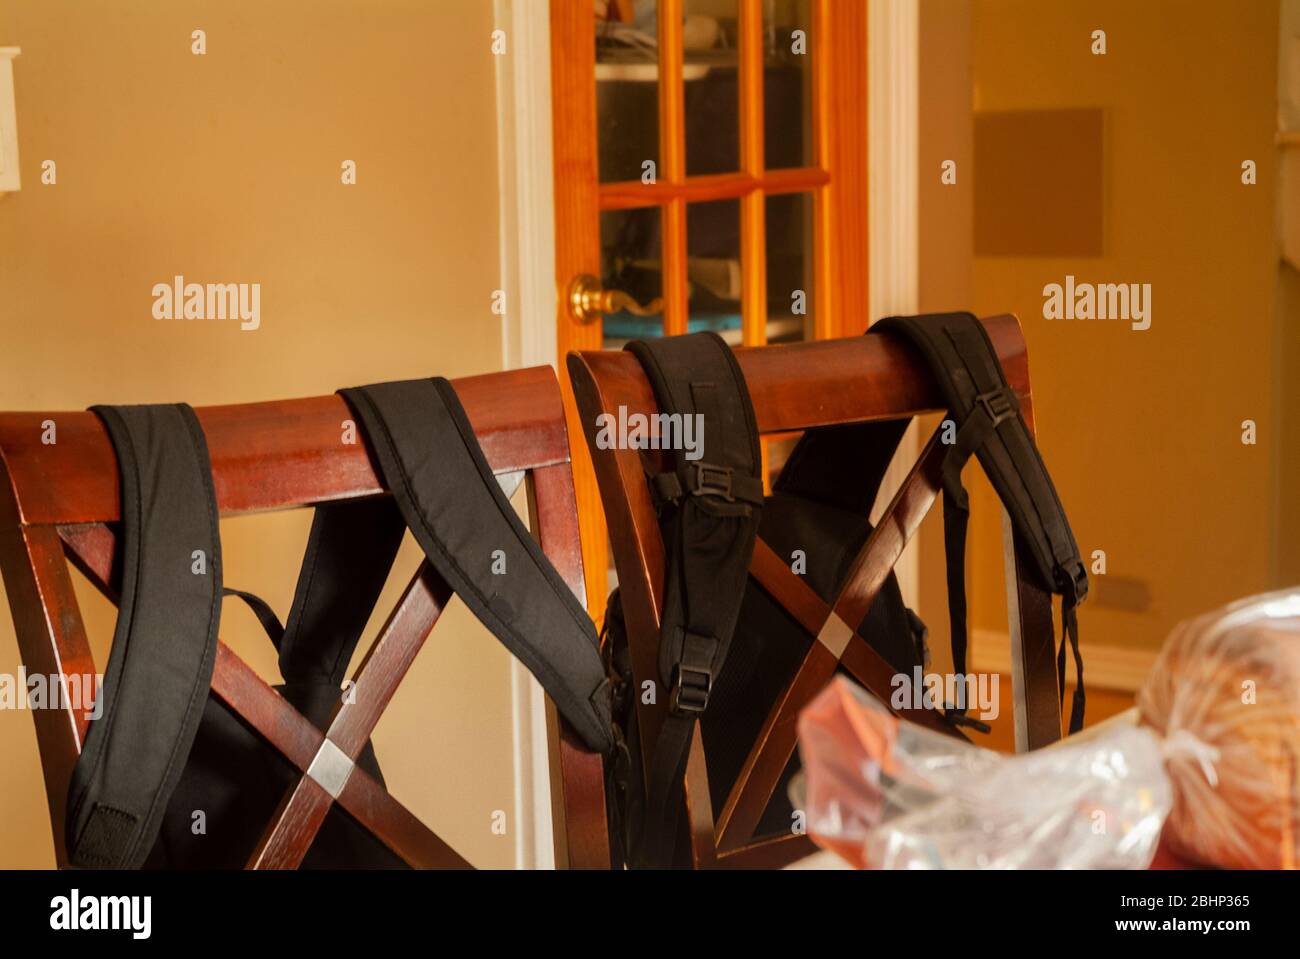 HOME SCHOOLING: Book bags hang on the back of kitchen chairs beside a picnic basket on a table. Stock Photo